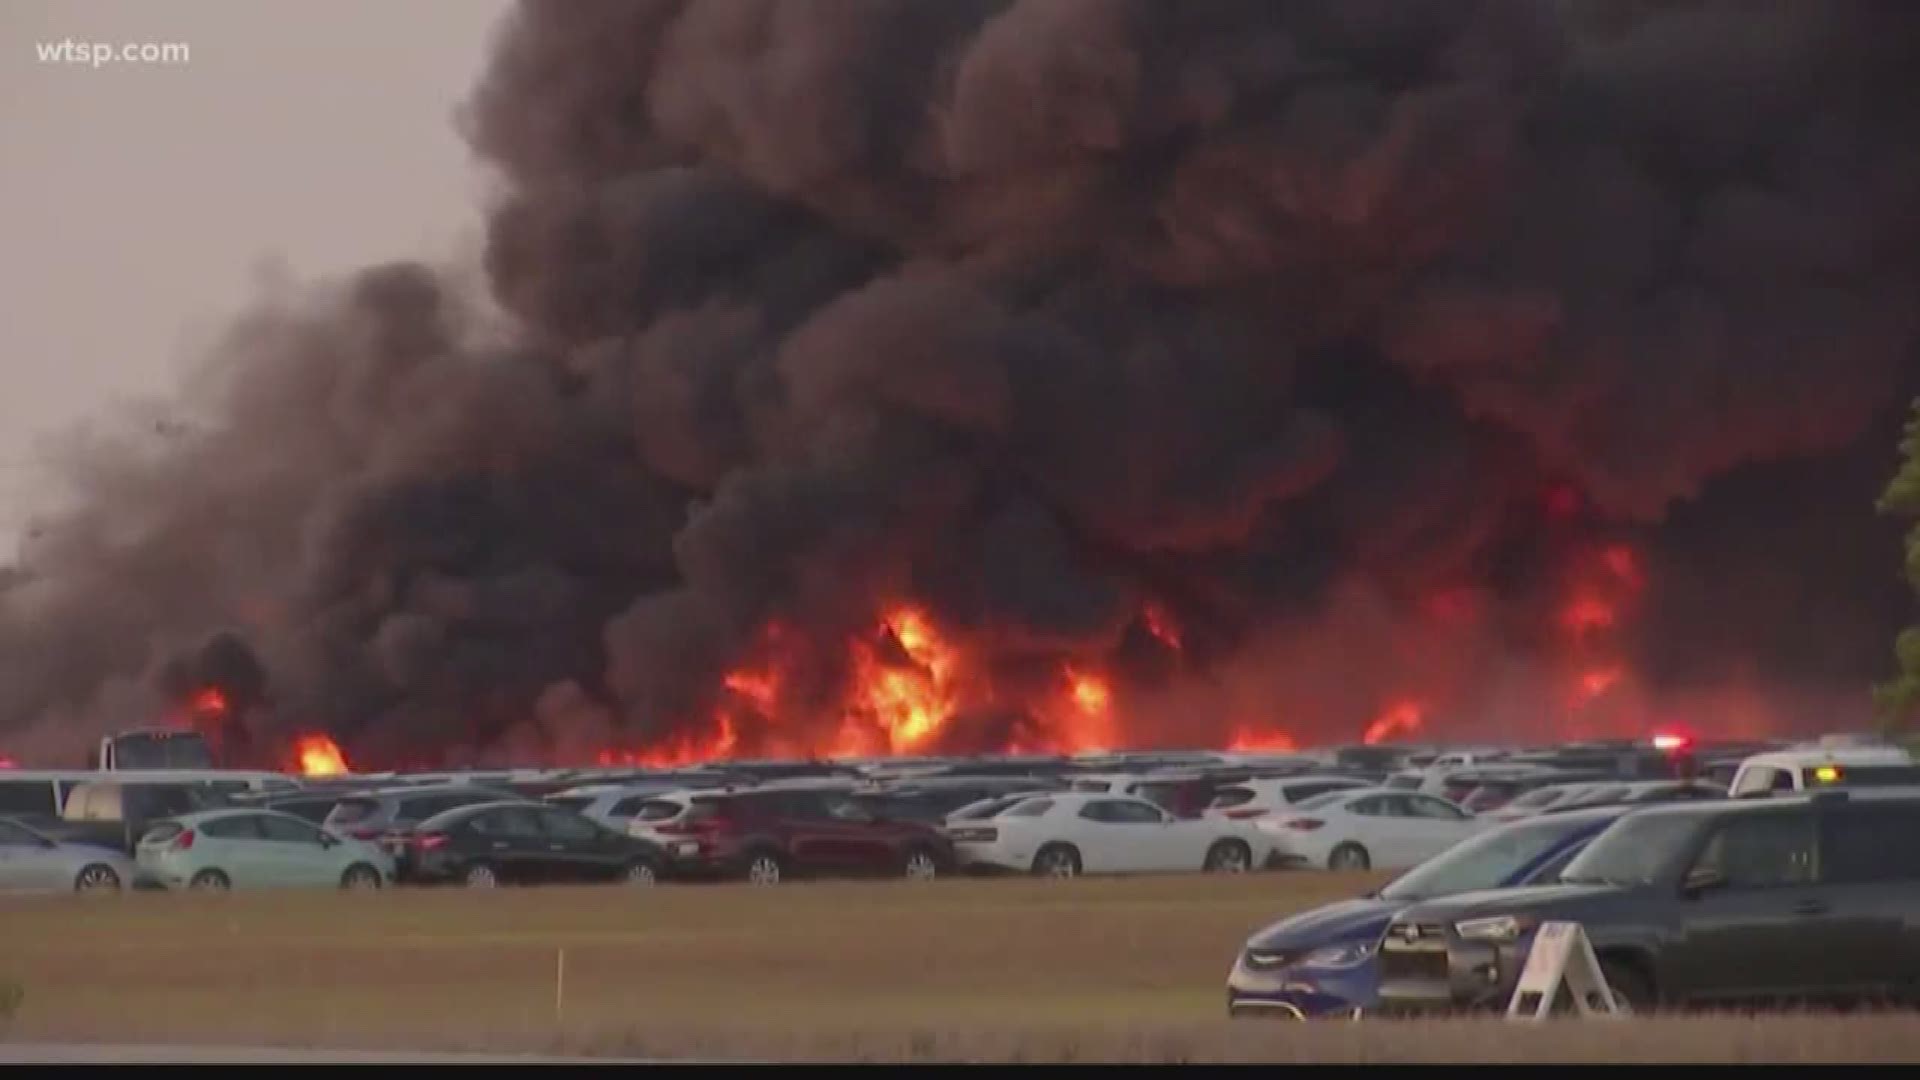 A 15-acre fire destroyed thousands of rental cars at Southwest Florida International Airport.